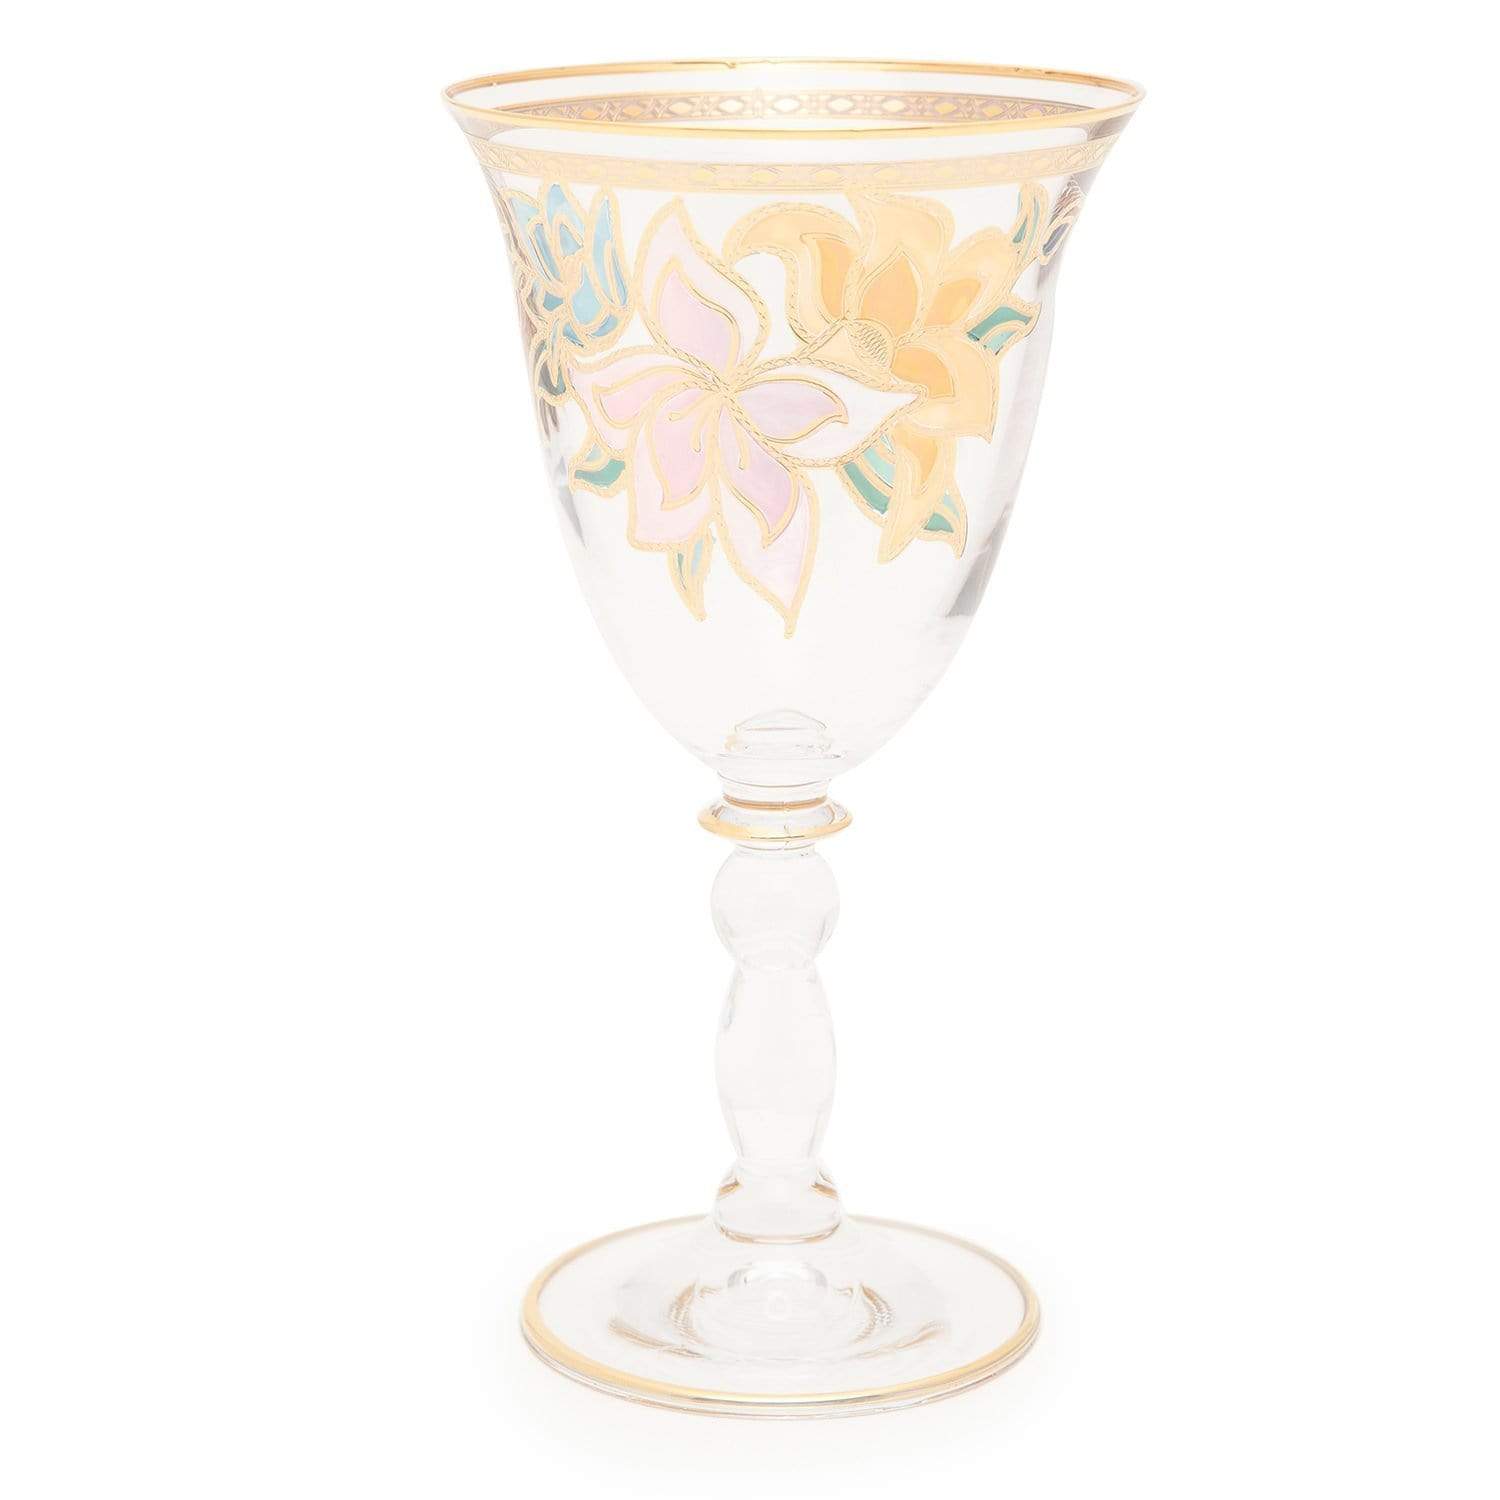 Combi Givy Goblet Set - Gold, 260 ml, Large, 6 Piece - G611Z/96 - Jashanmal Home